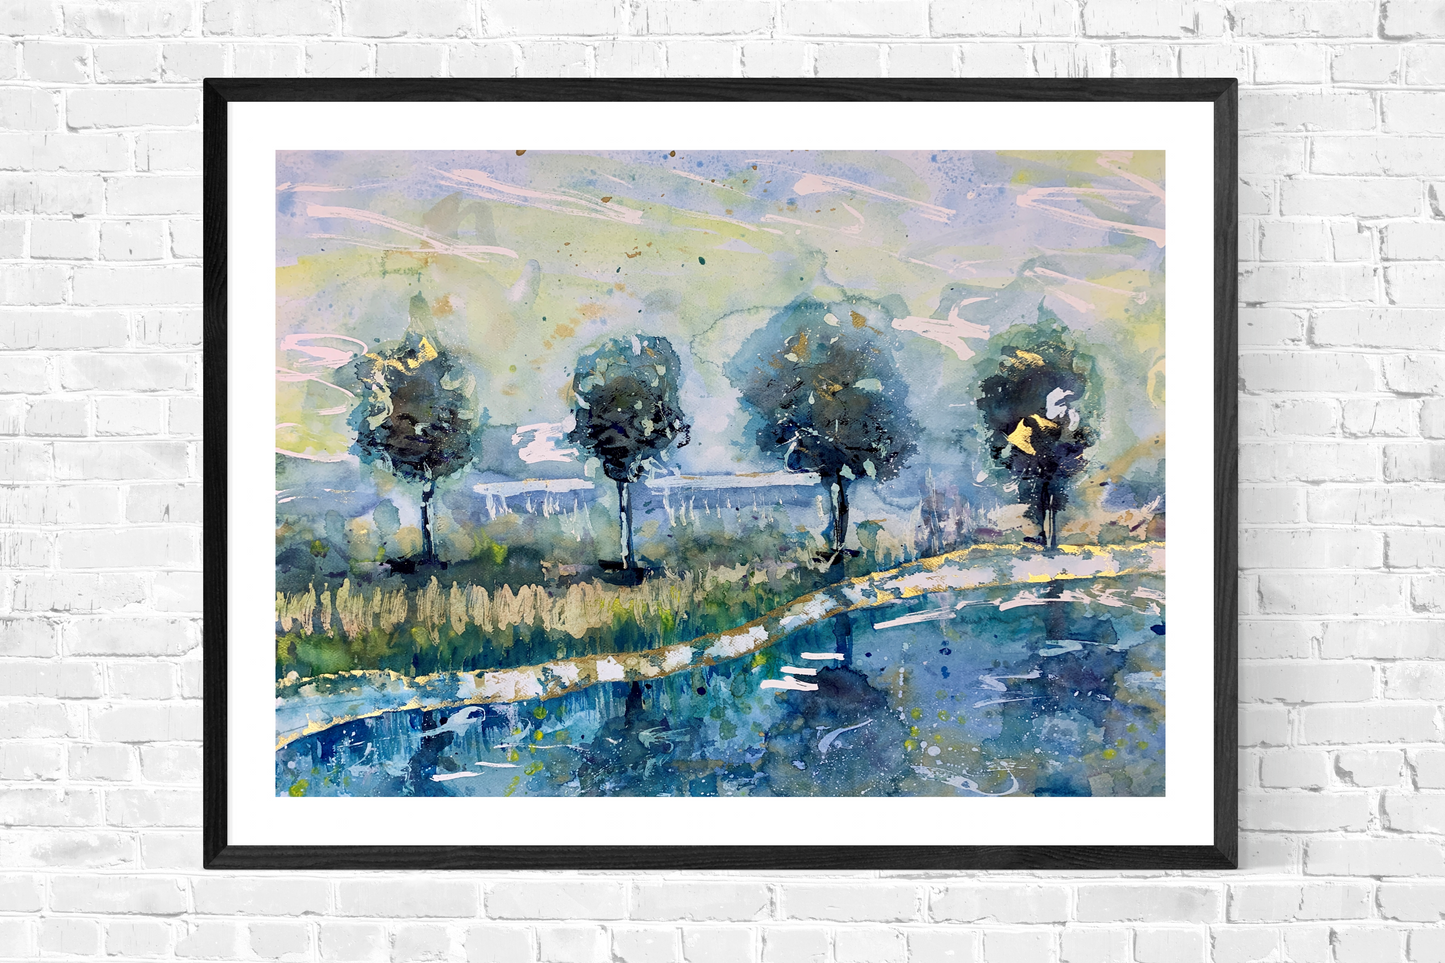 SALE - Water, Trees and Mist on the way Home (Original, Signed and Framed)